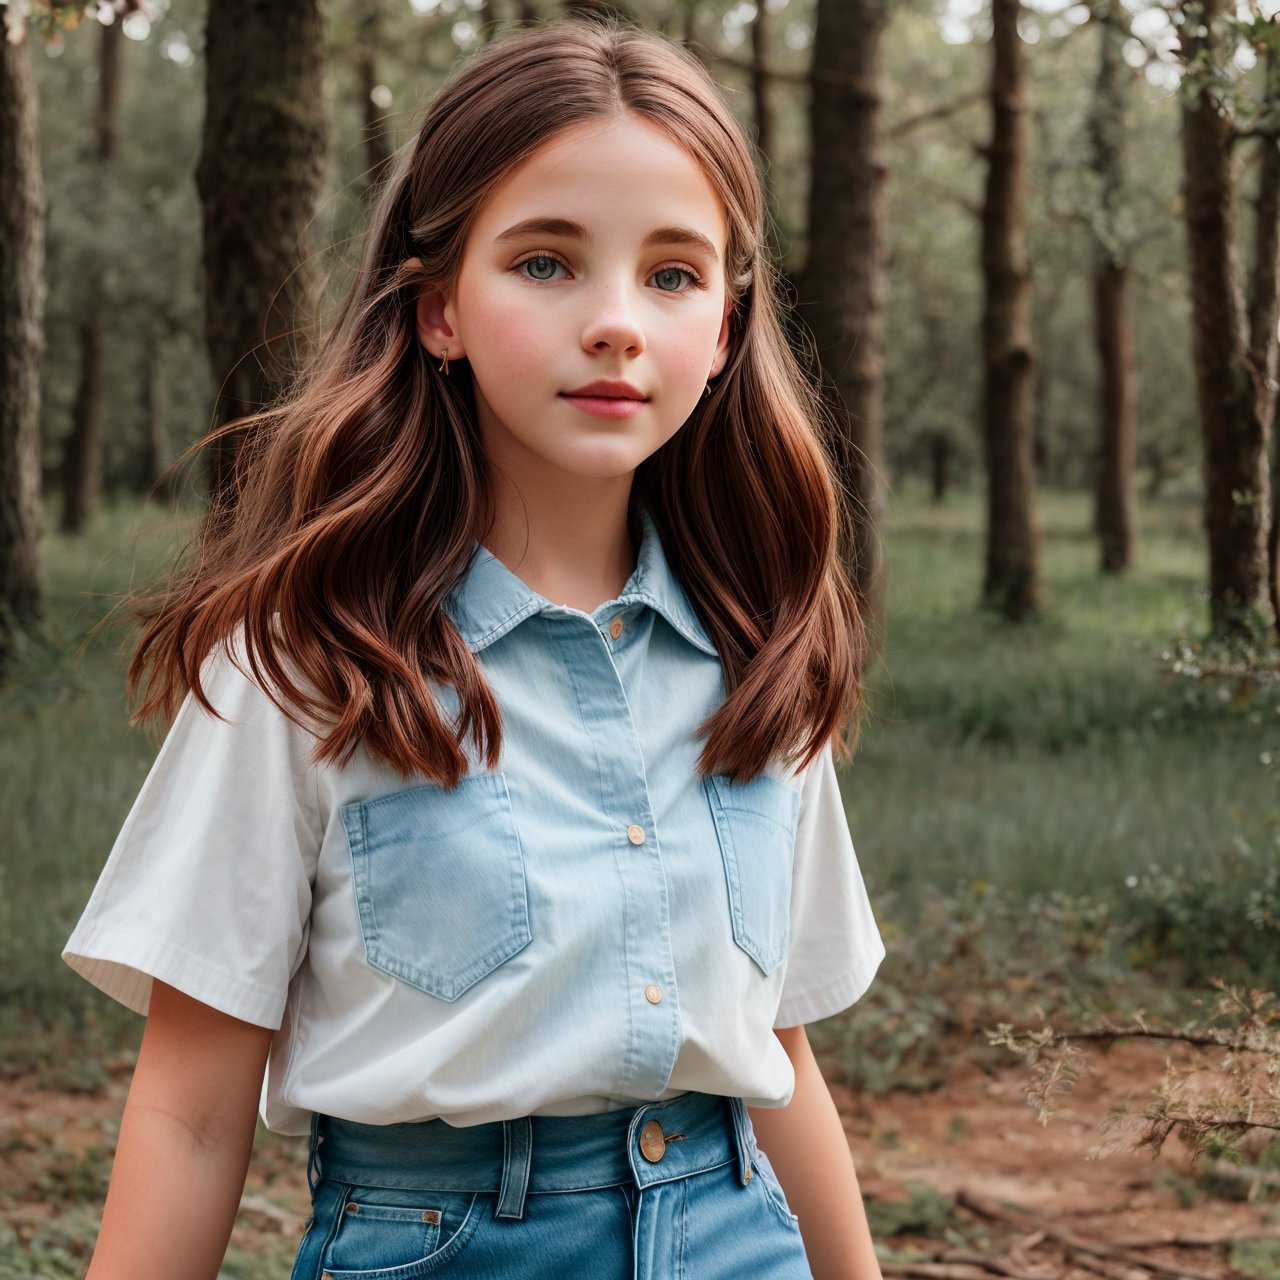 extra resolution, close up of stunning (AIDA_LoRA_arusso:1.04) <lora:AIDA_LoRA_arusso:0.72> wearing a shirt and denim skirt in the field with trees on the backgrounds, little girl, pretty face, naughty, intricate pattern, studio photo, studio photo, kkw-ph1, hdr, f1.5, (colorful:1.1)